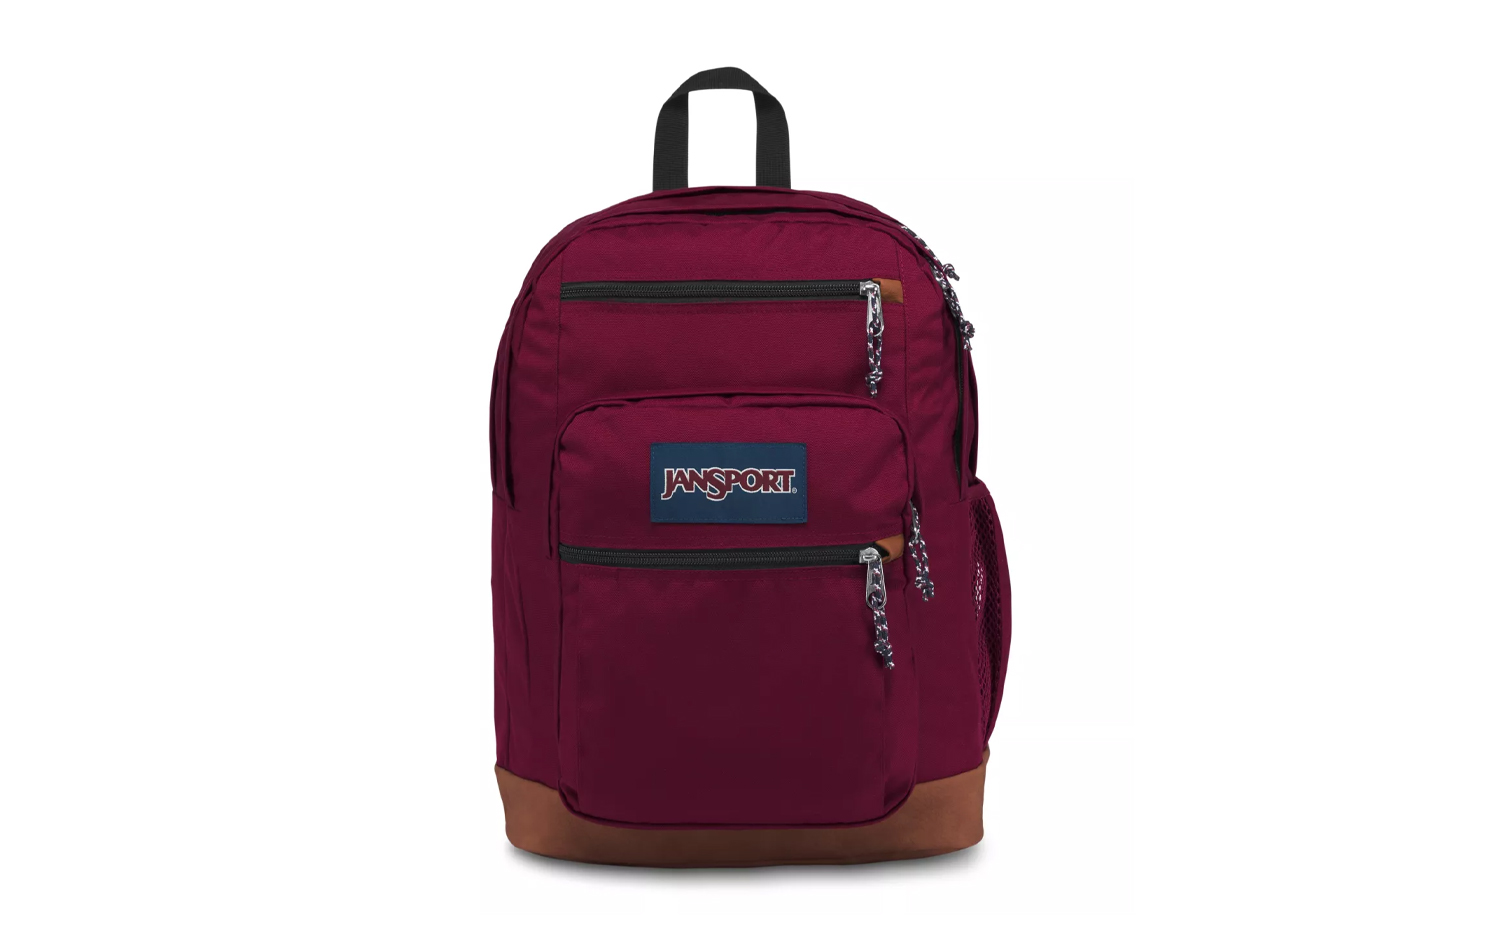 best back to school accessories for MacBook: JanSport Cool Student Backpack on white background